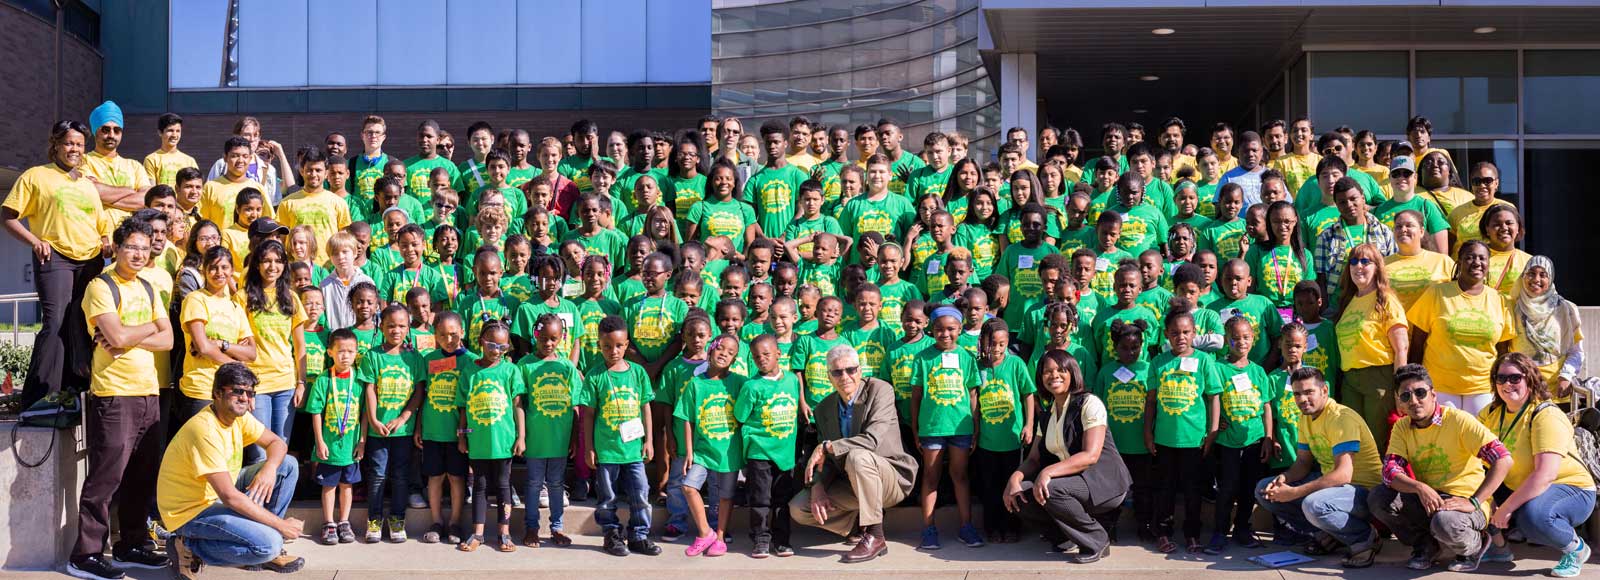 group photo of engineering campers and instructors